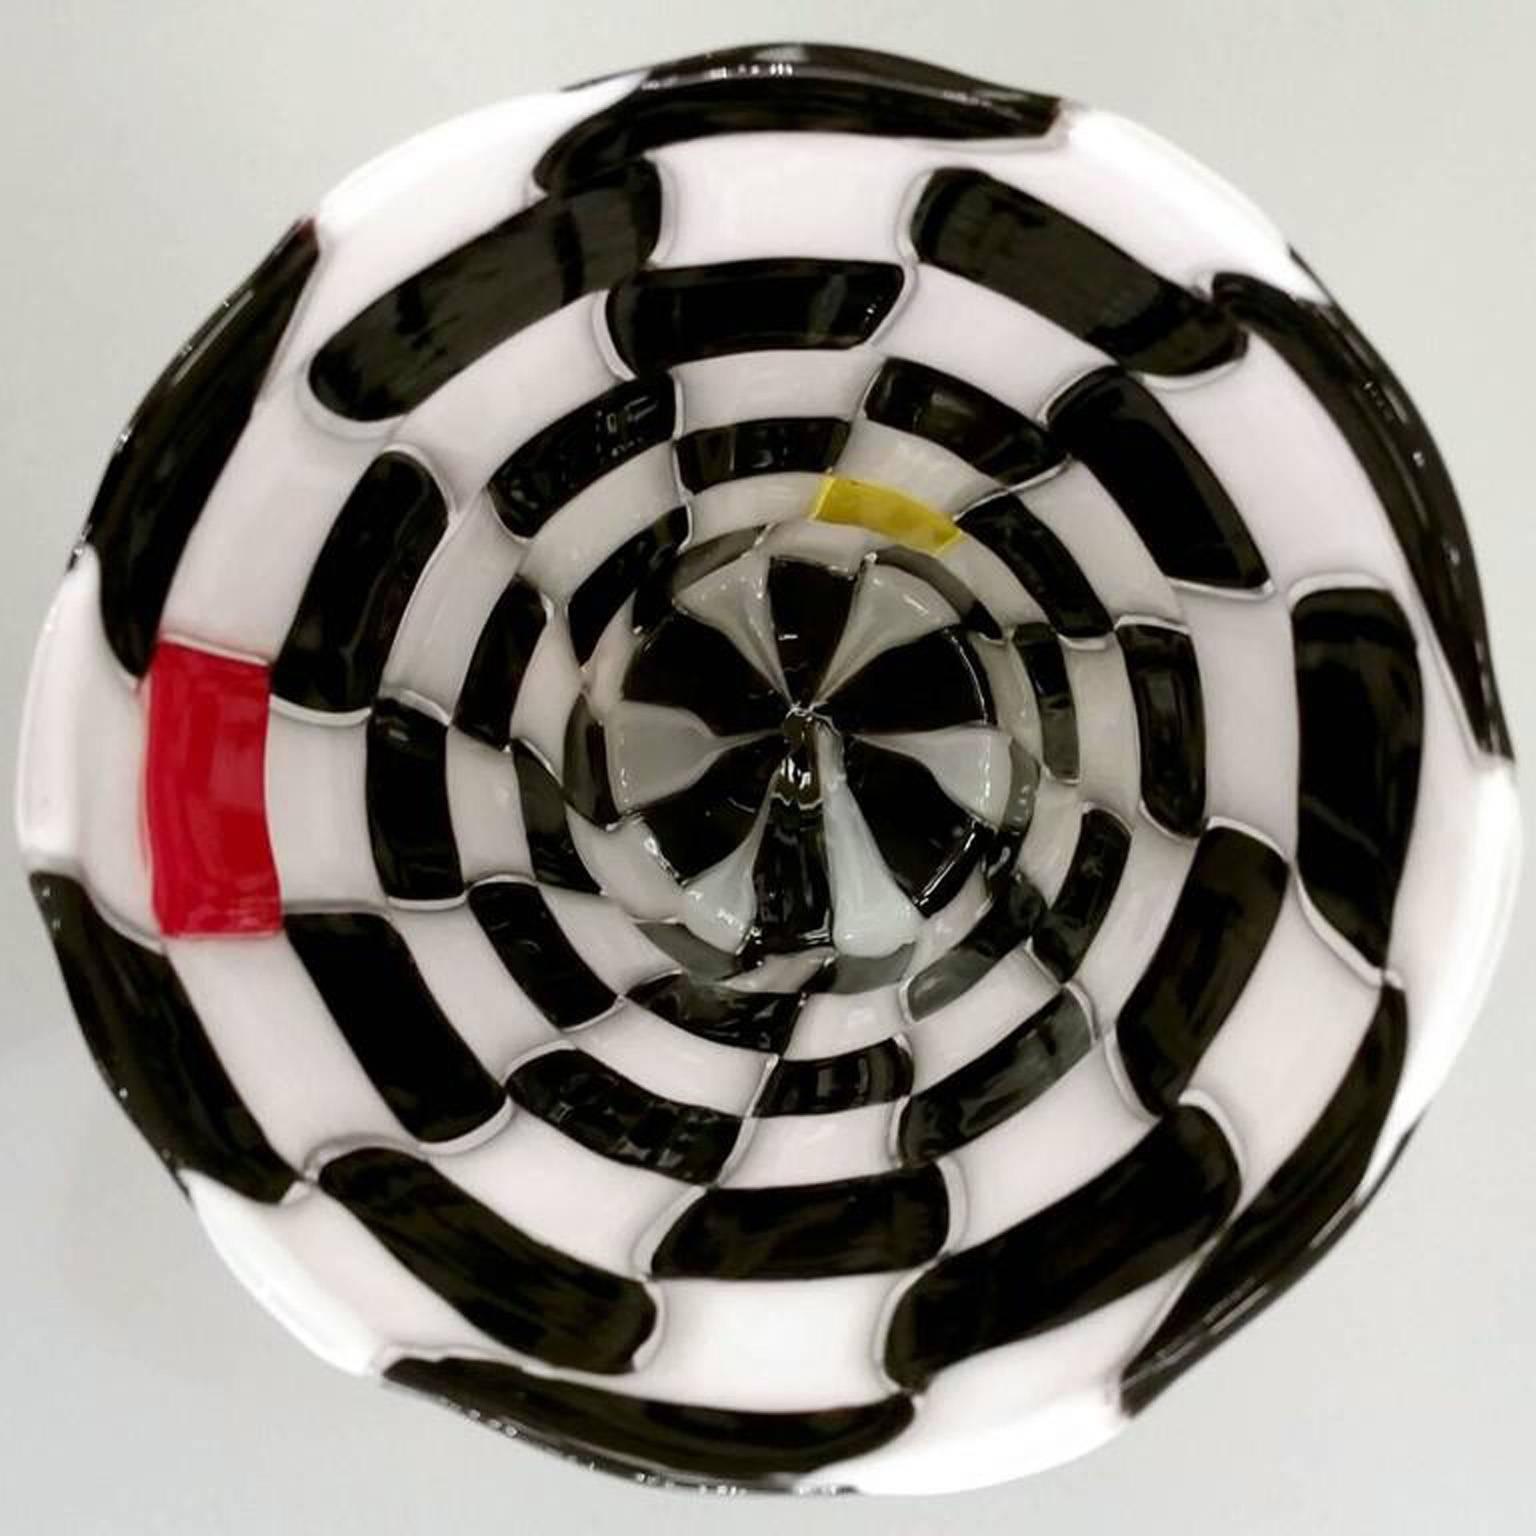 Venini Pezzati glass vase, designed by Gianni Versace. Checkerboard patchwork glass composed of black, white, red and yellow squares. Engraved signature 